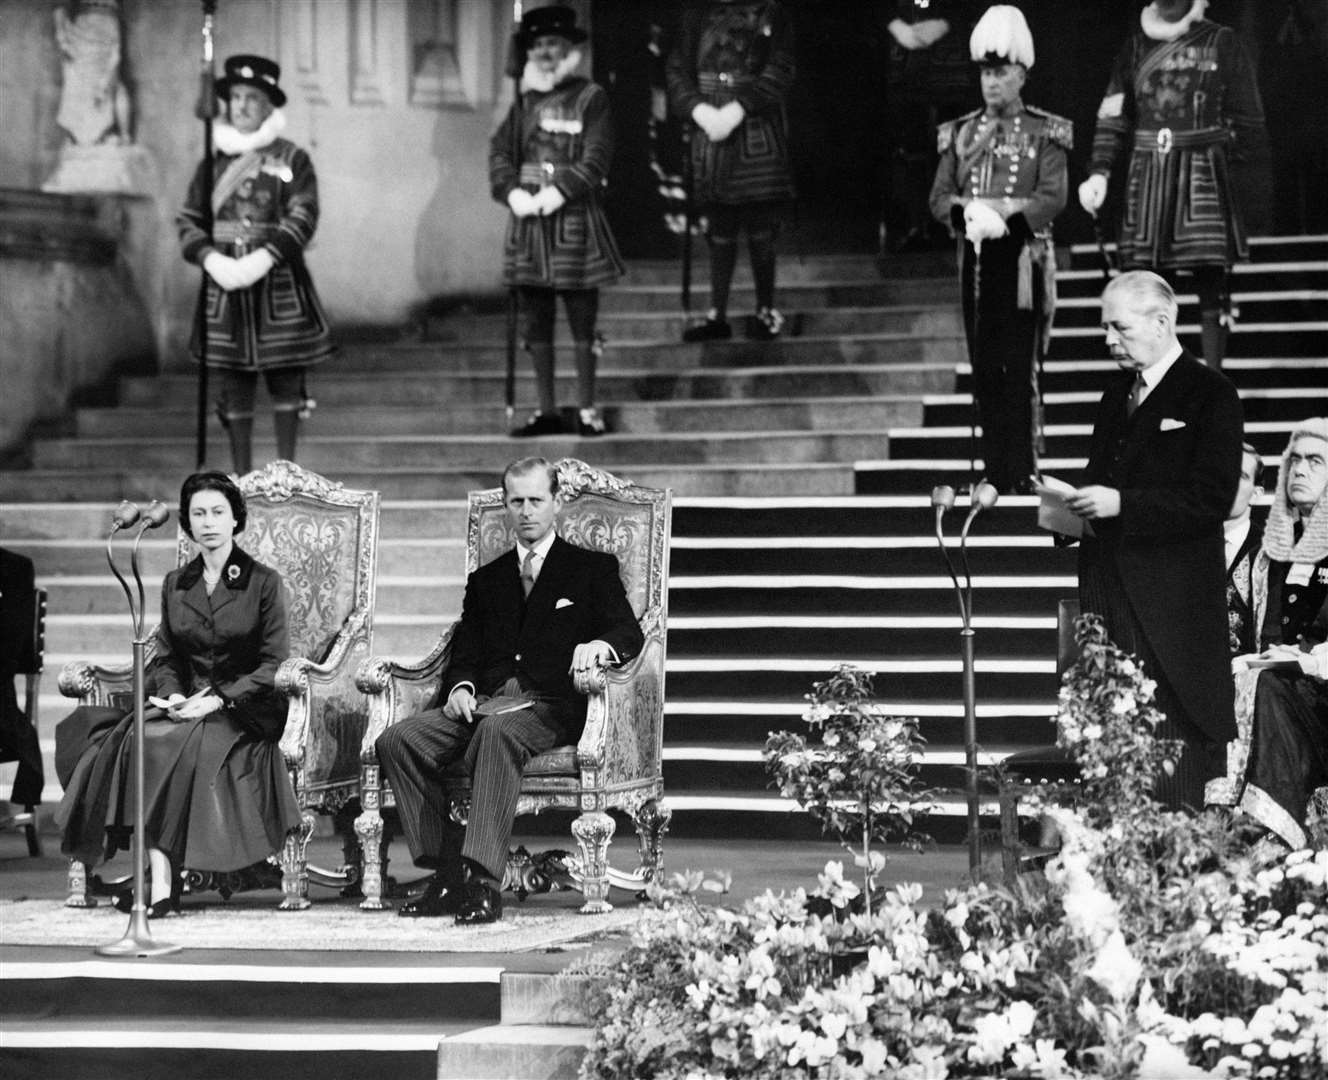 The Queen and Duke of Edinburgh listen as Harold Macmillan delivers his speech at the Inter-Parliamentary Conference in London’s Westminster Hall in 1957 (PA)